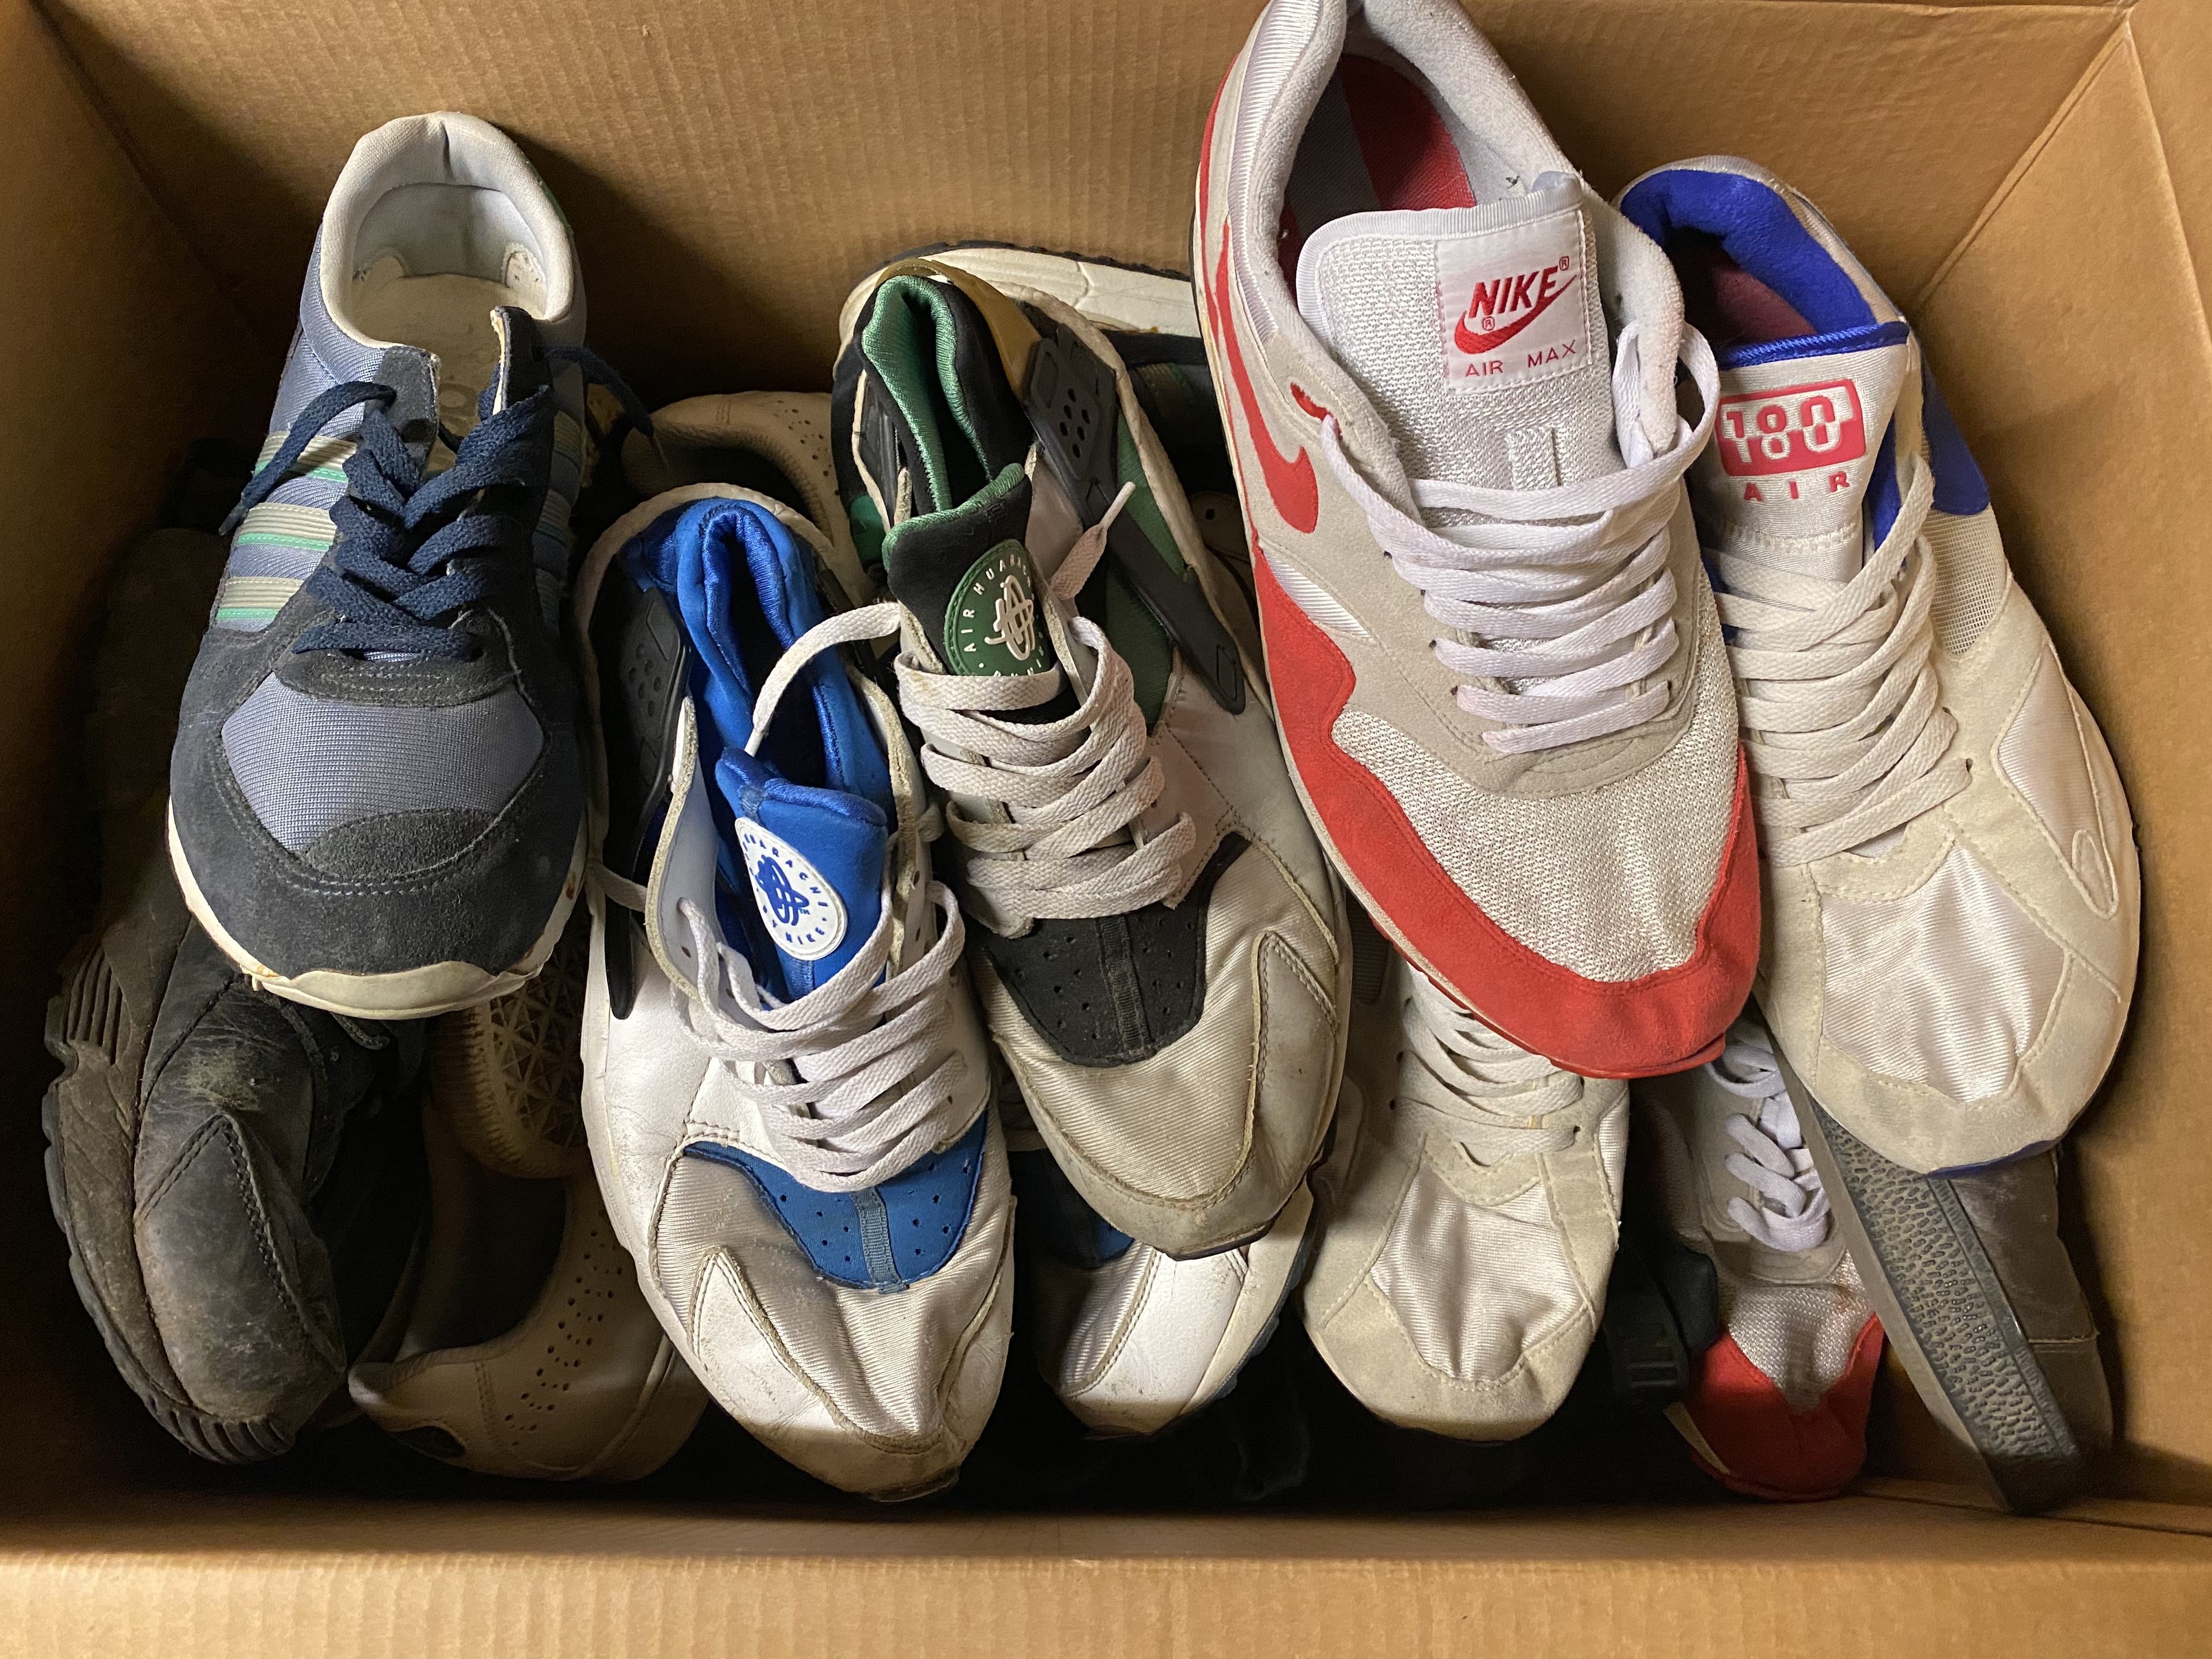 Anyone into trainers/sneakers? (Vol. 2) - Page 359 - The Lounge - PistonHeads